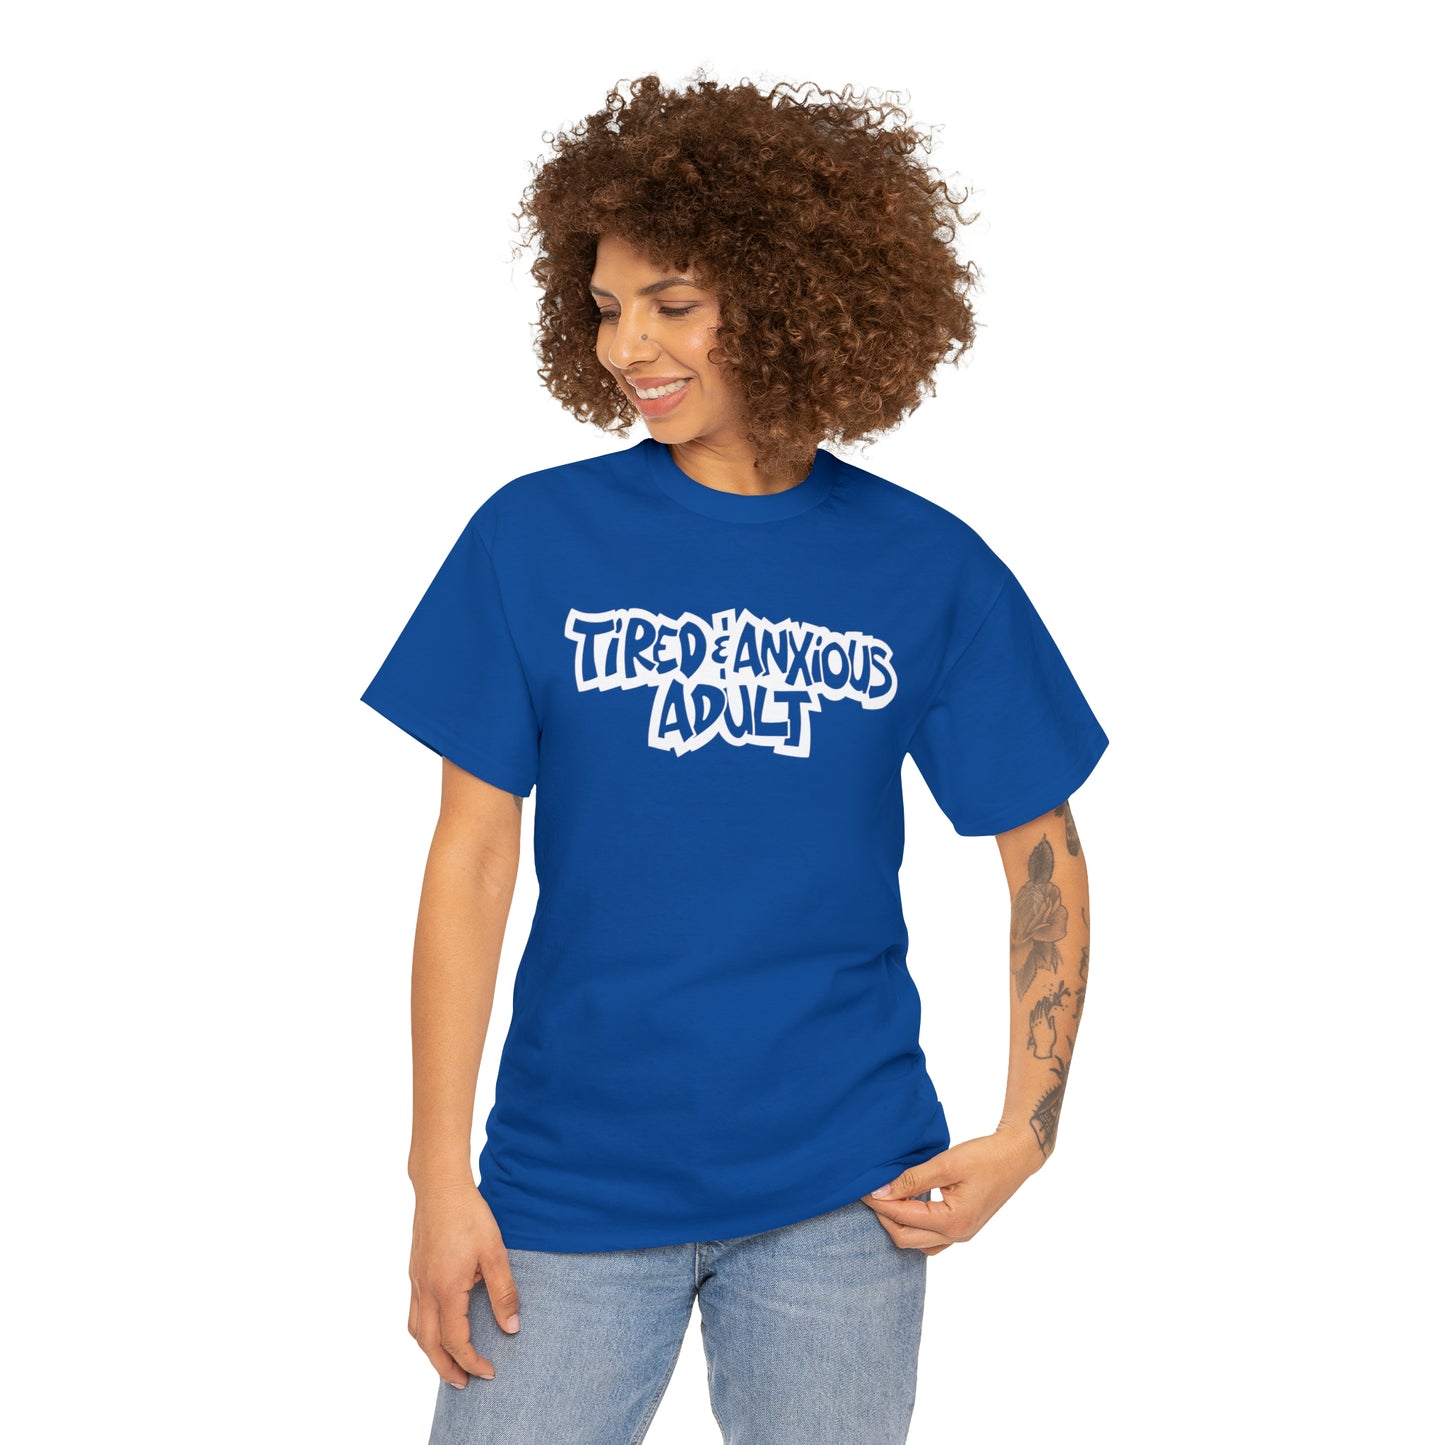 Tired & Anxious Adult t-shirt